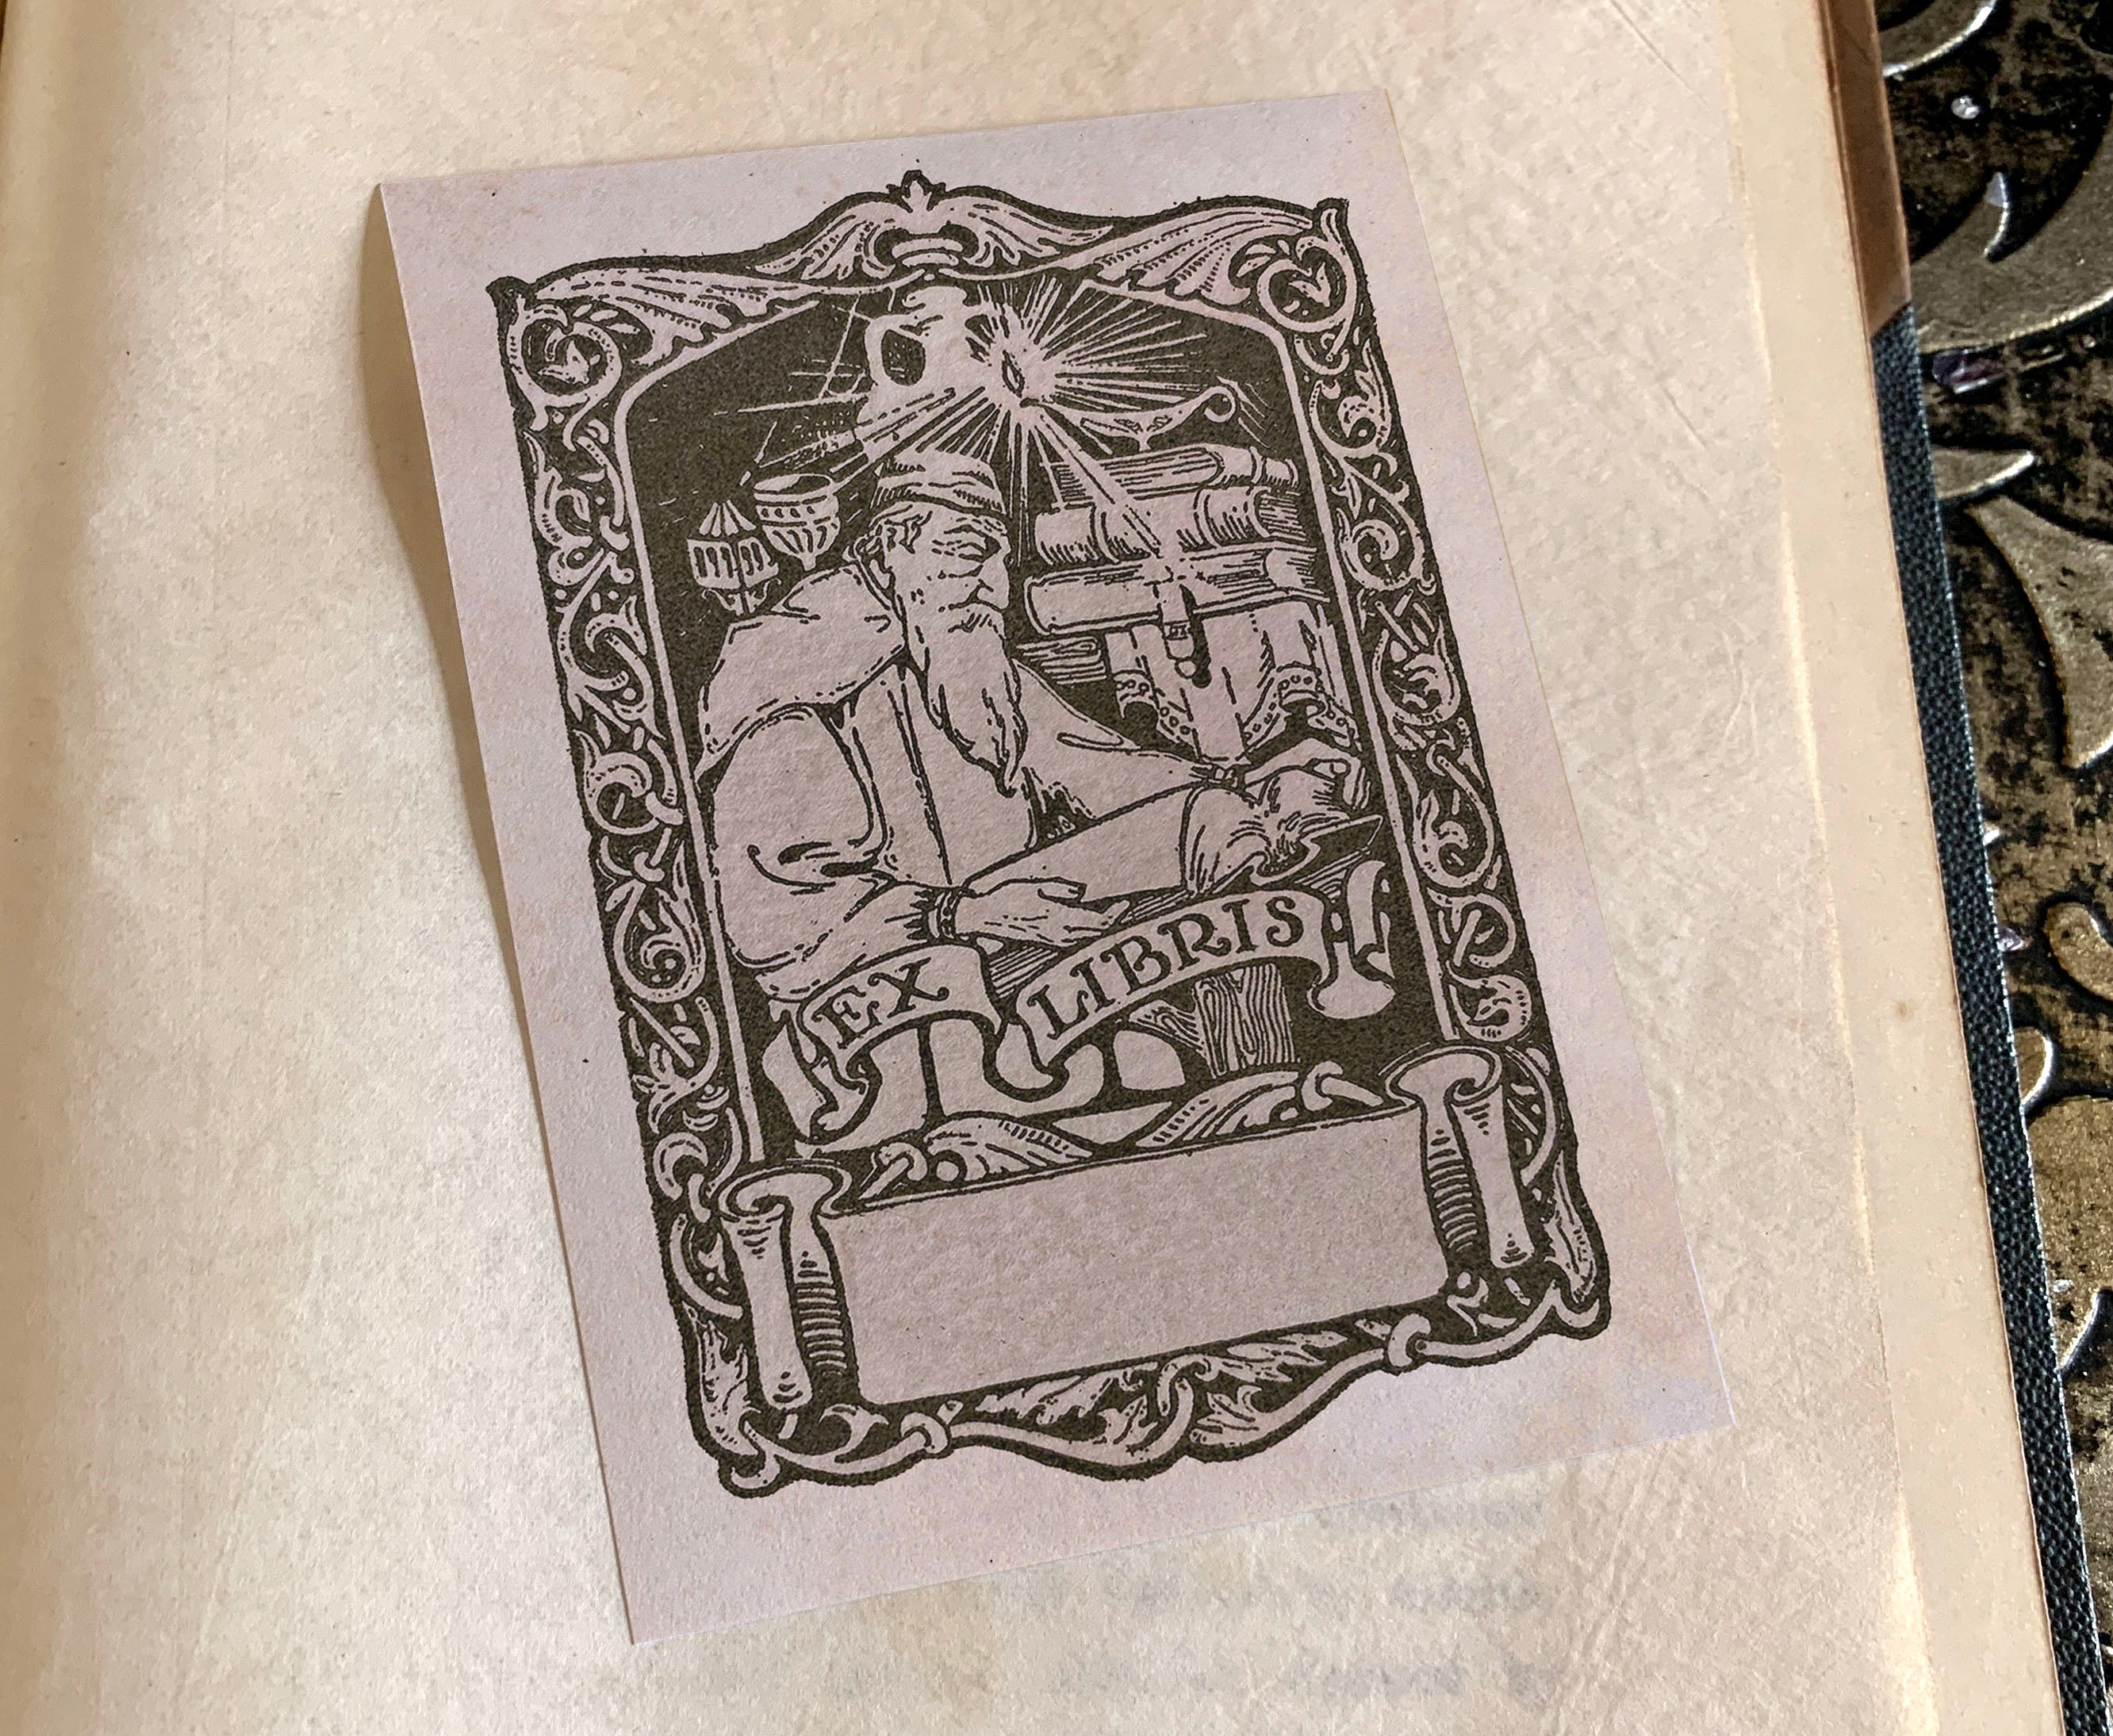 Scholar's Haven, Judaica, Personalized Ex-Libris Bookplates, Crafted on Traditional Gummed Paper, 3in x 4in, Set of 30